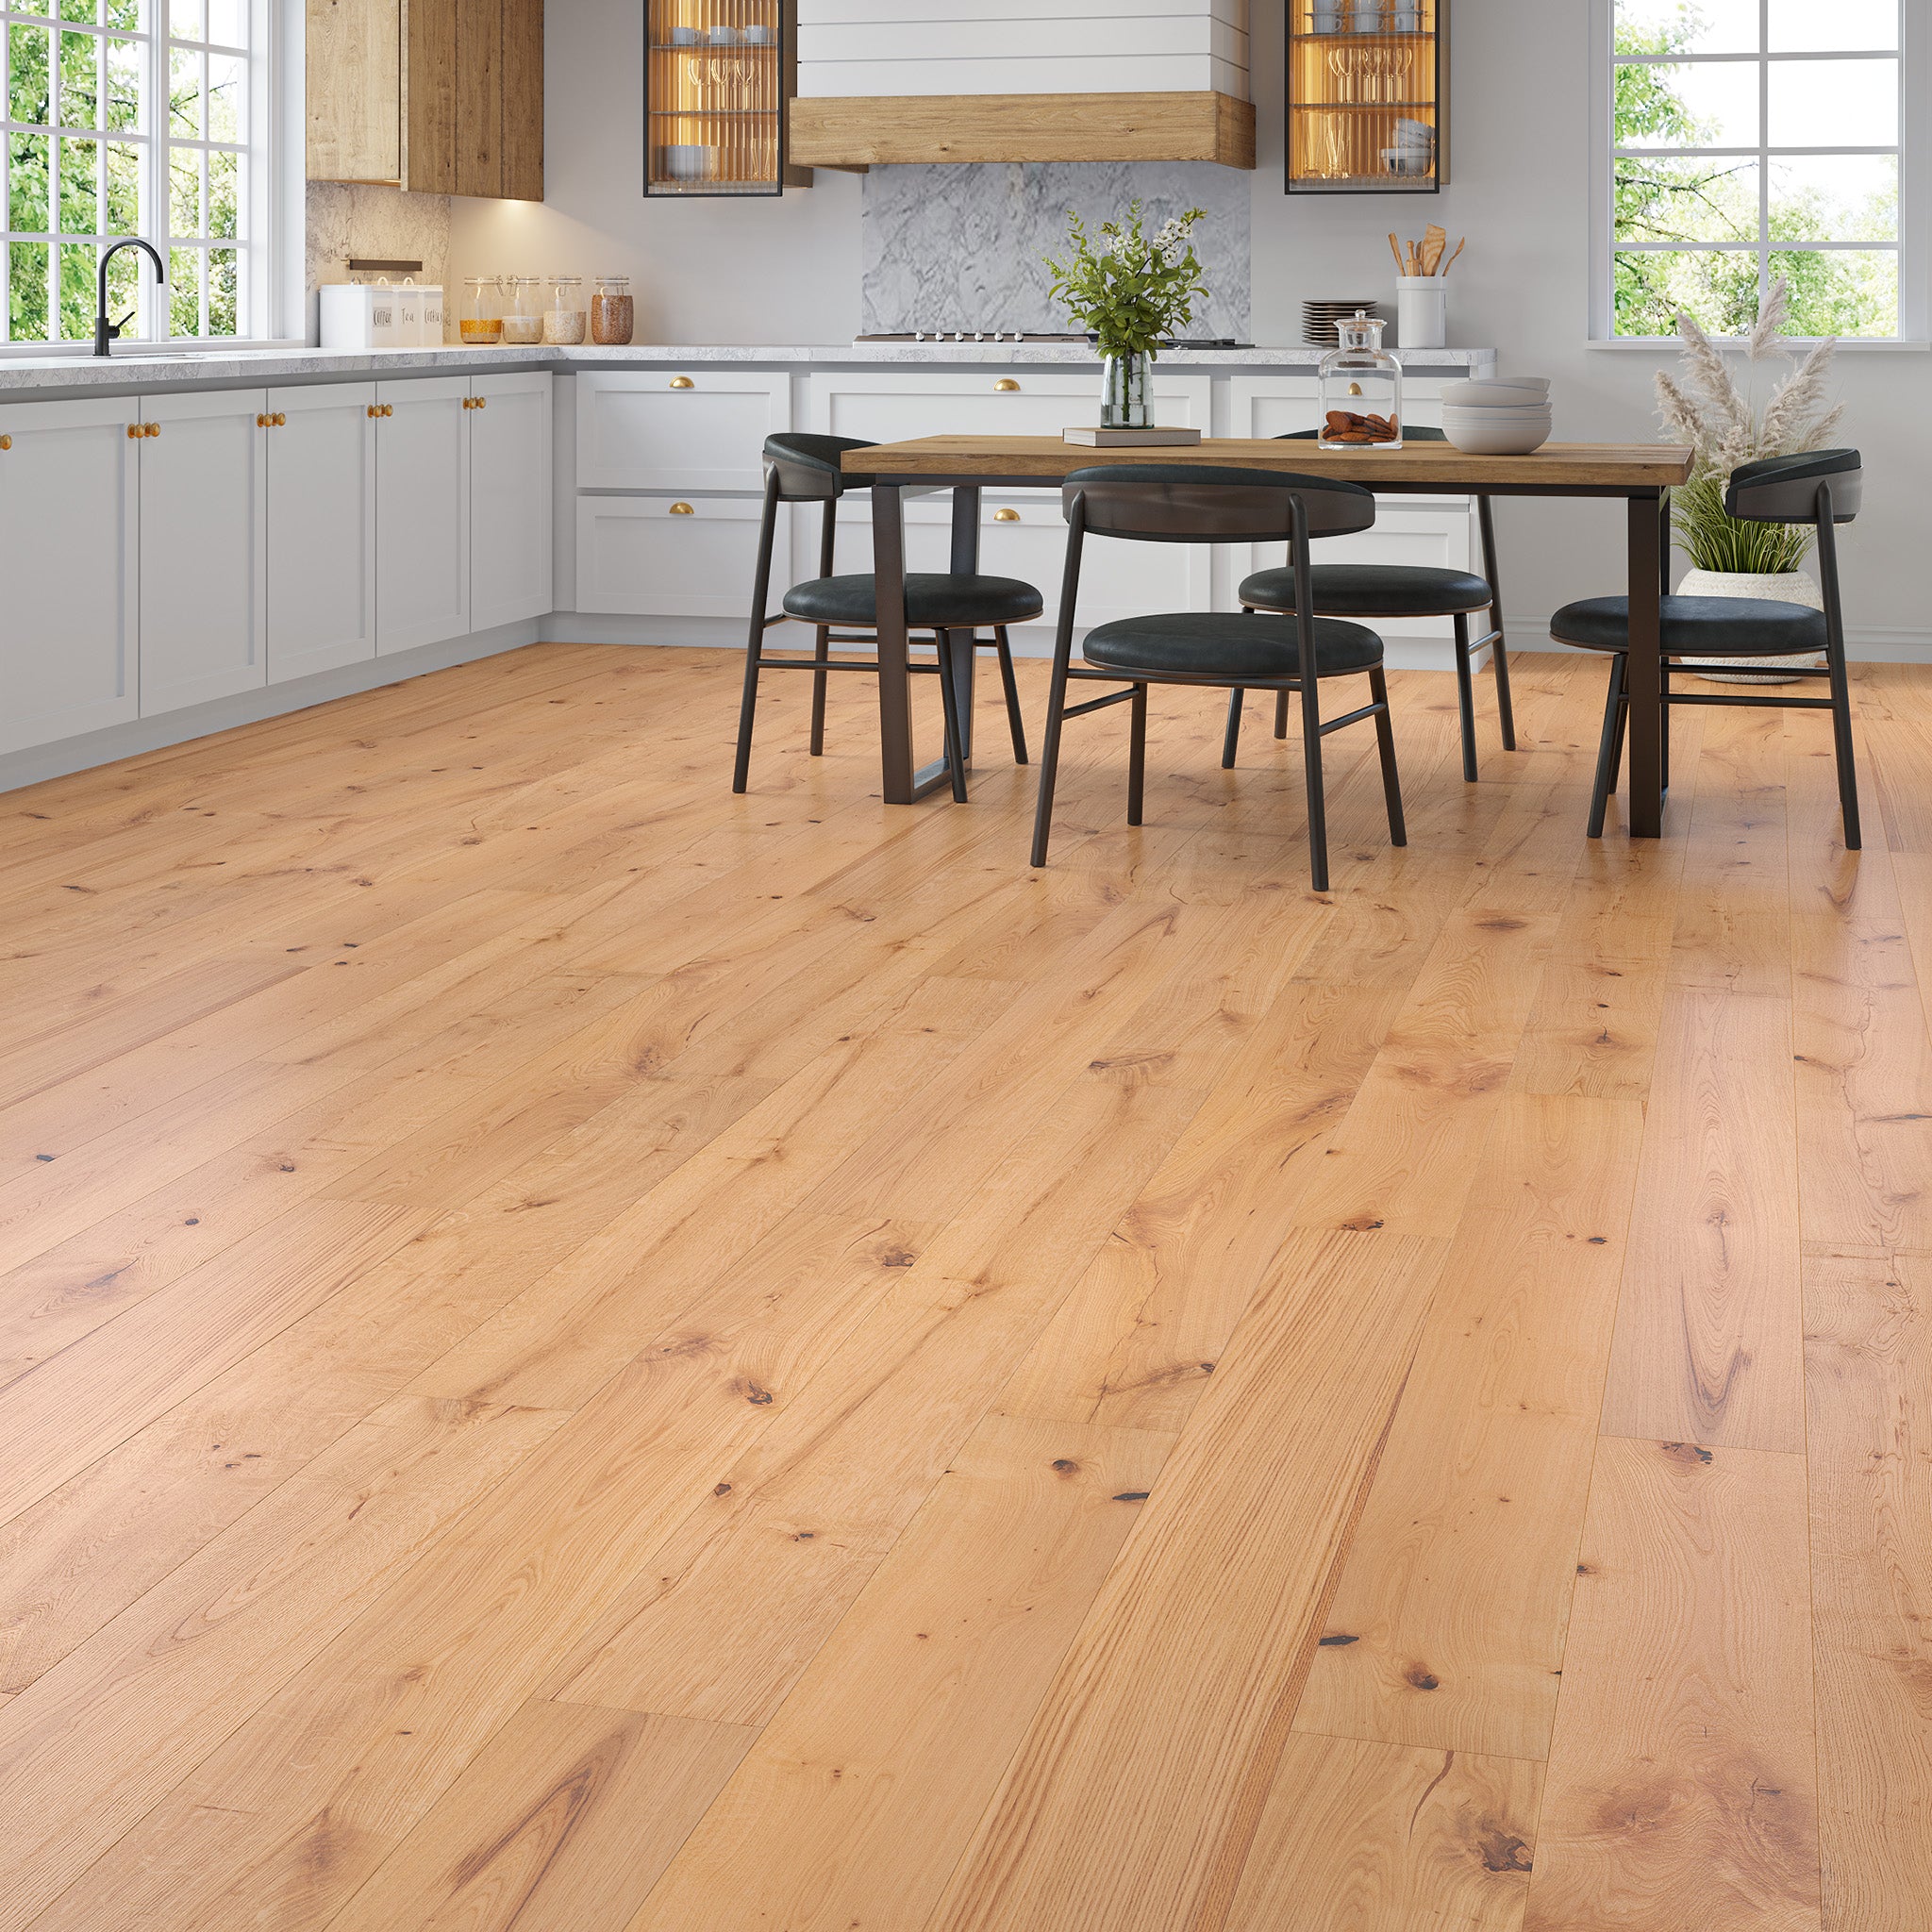 Wisteria Oak Natural Smooth Lacquered 20/6 x 190mm Straight Engineered